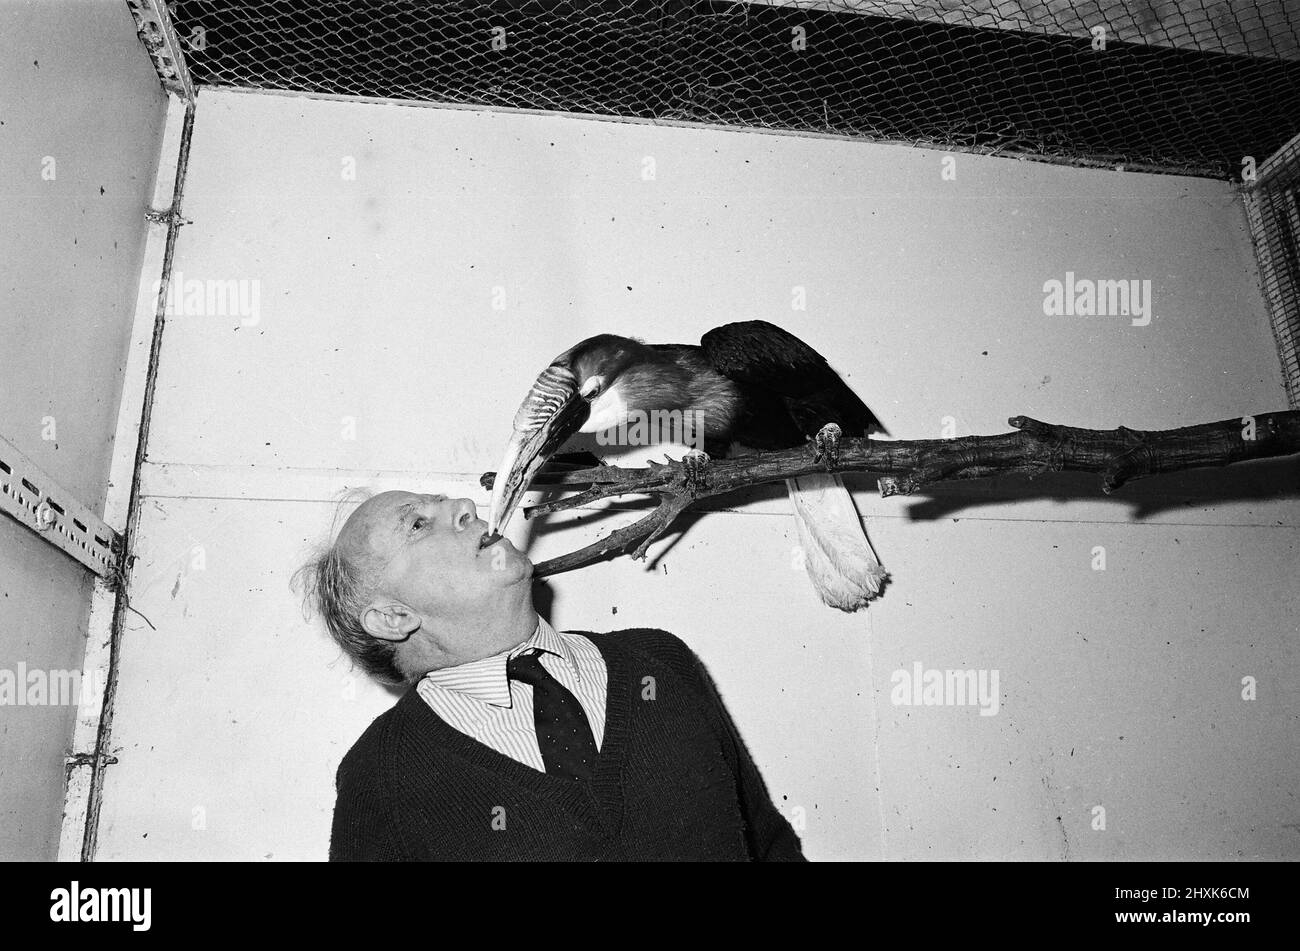 Exmouth Zoo closes down. The zoo was closed due to council orders regarding cramped living conditions for the animals. An extention was planned but denied by the council so over 200 animals had to be re-homed or put down. Owner Ken Smith feeding grapes to 'Henry', a Papuan hornbill. 22nd December 1977. Stock Photo